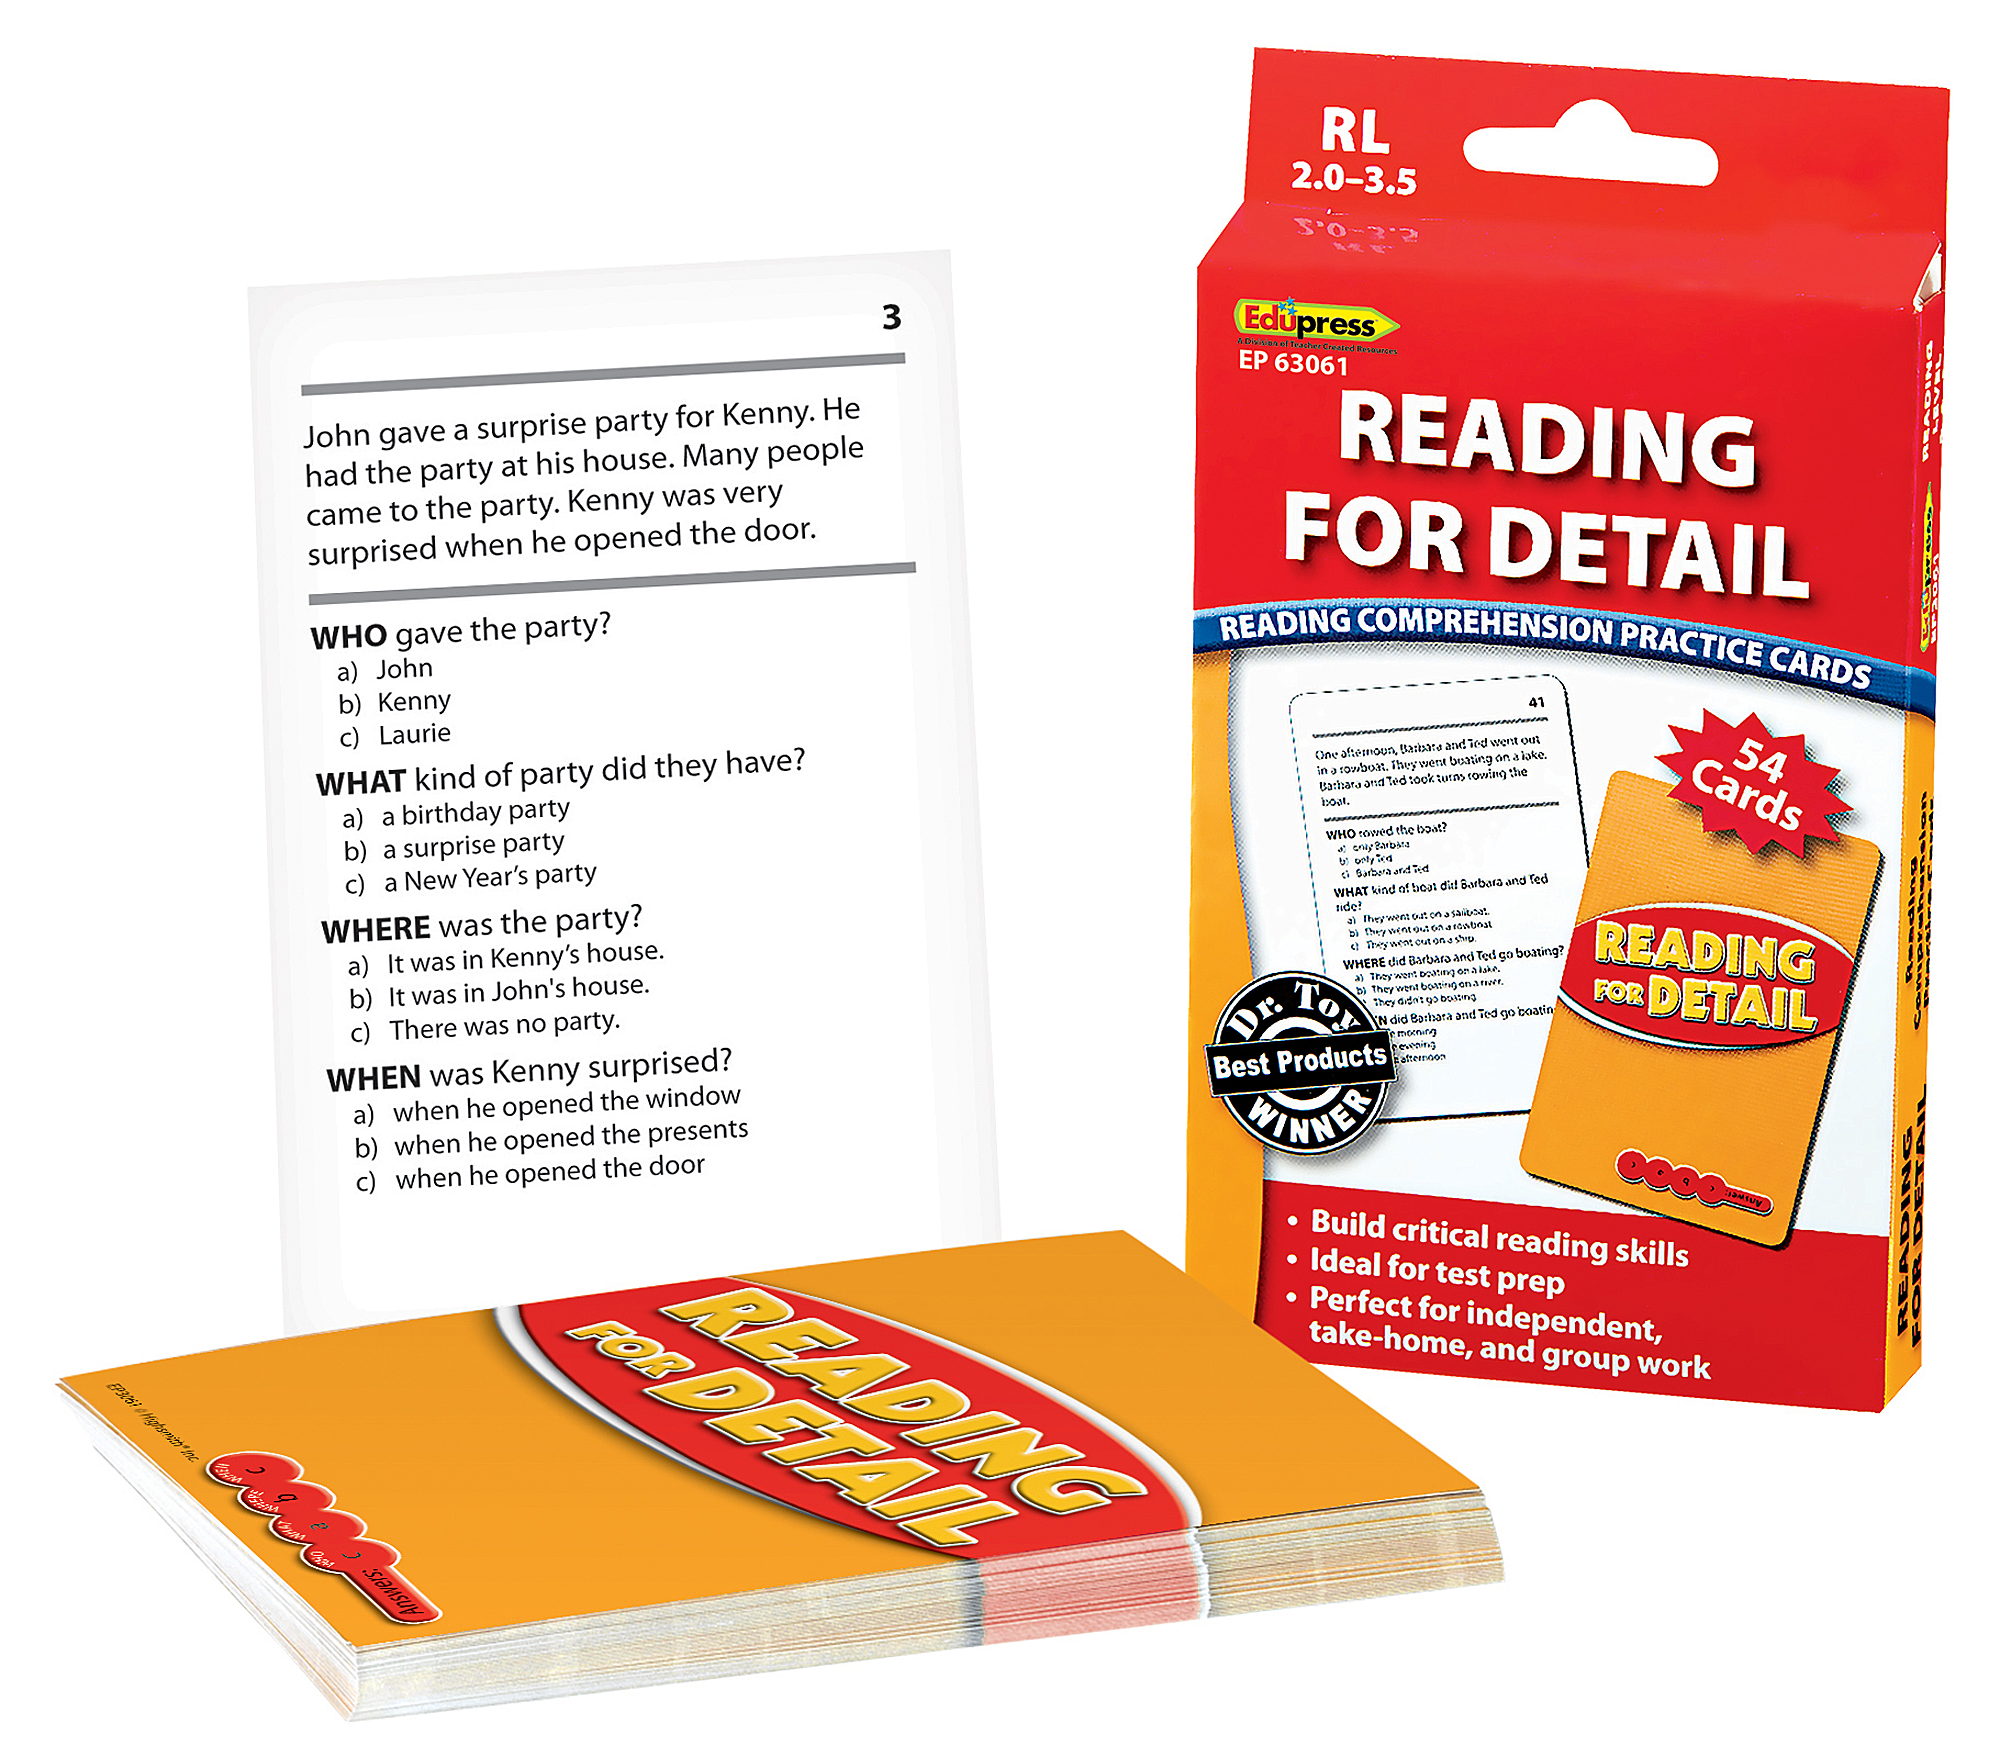 Reading Comprehension Practice Cards: Reading for Detail (Red Level)